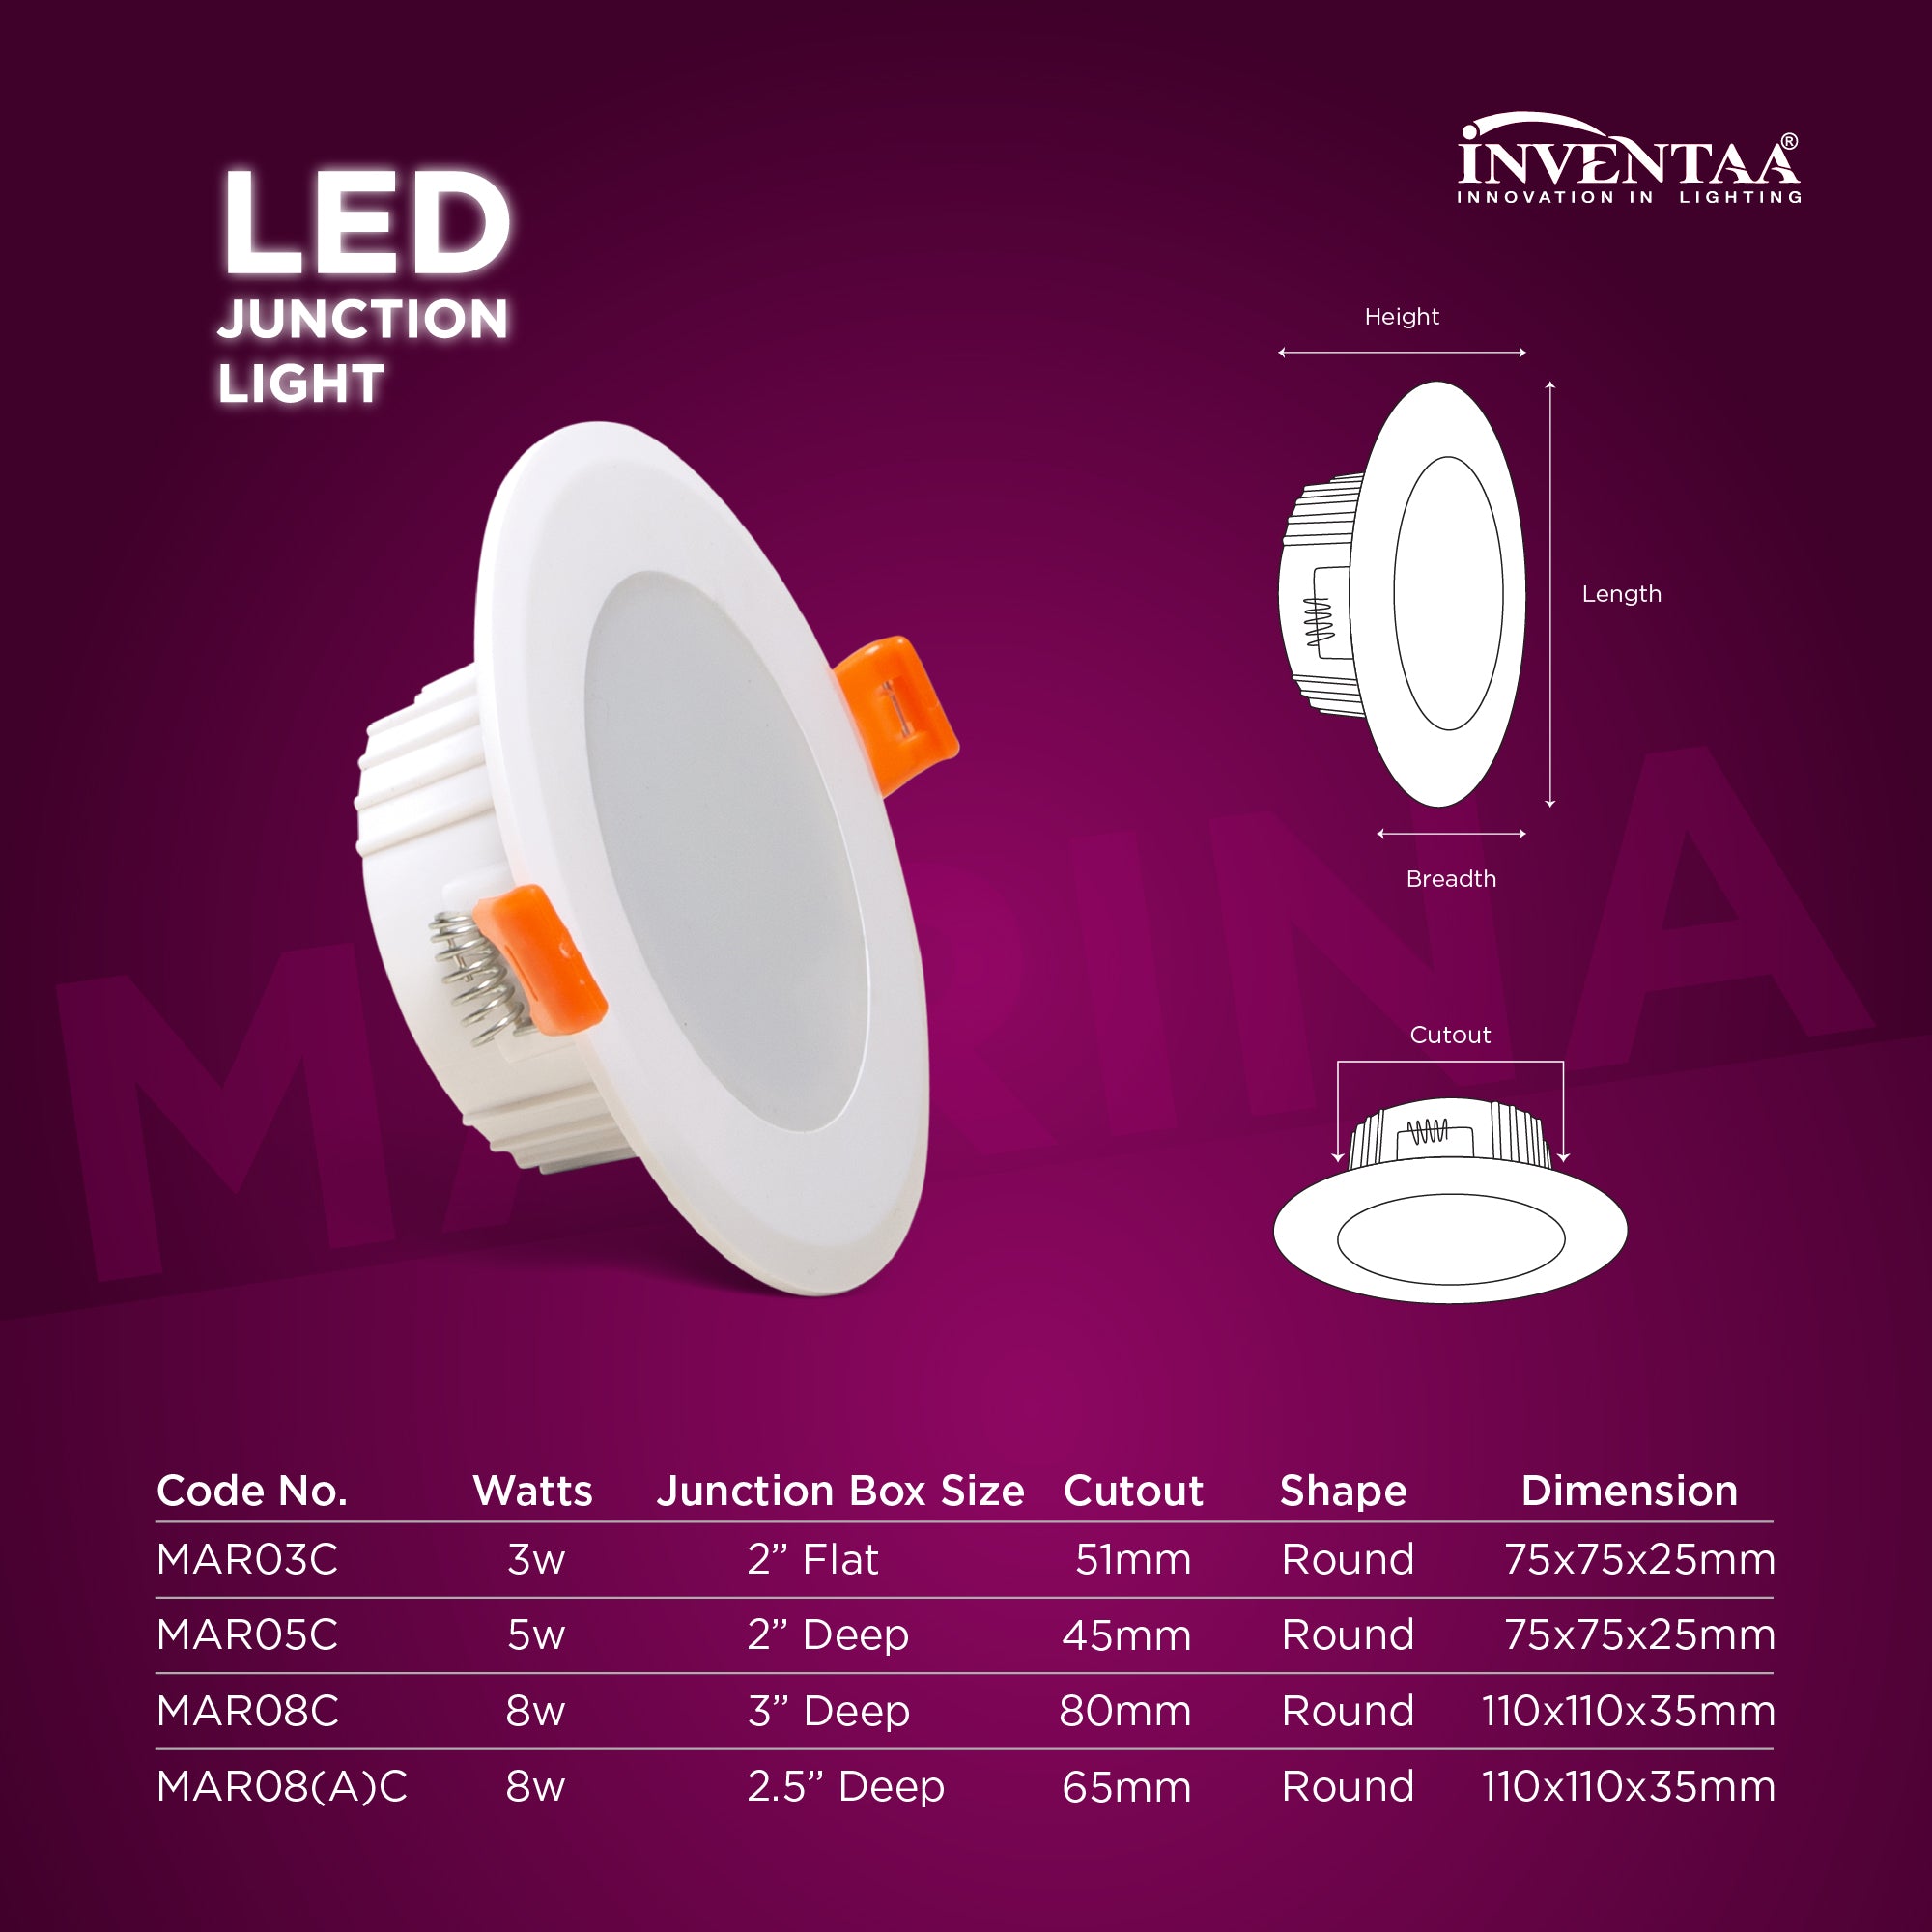 Dimension Of Marina 3W LED Junction Light #Suitable For_2 inch Flat Junction Box